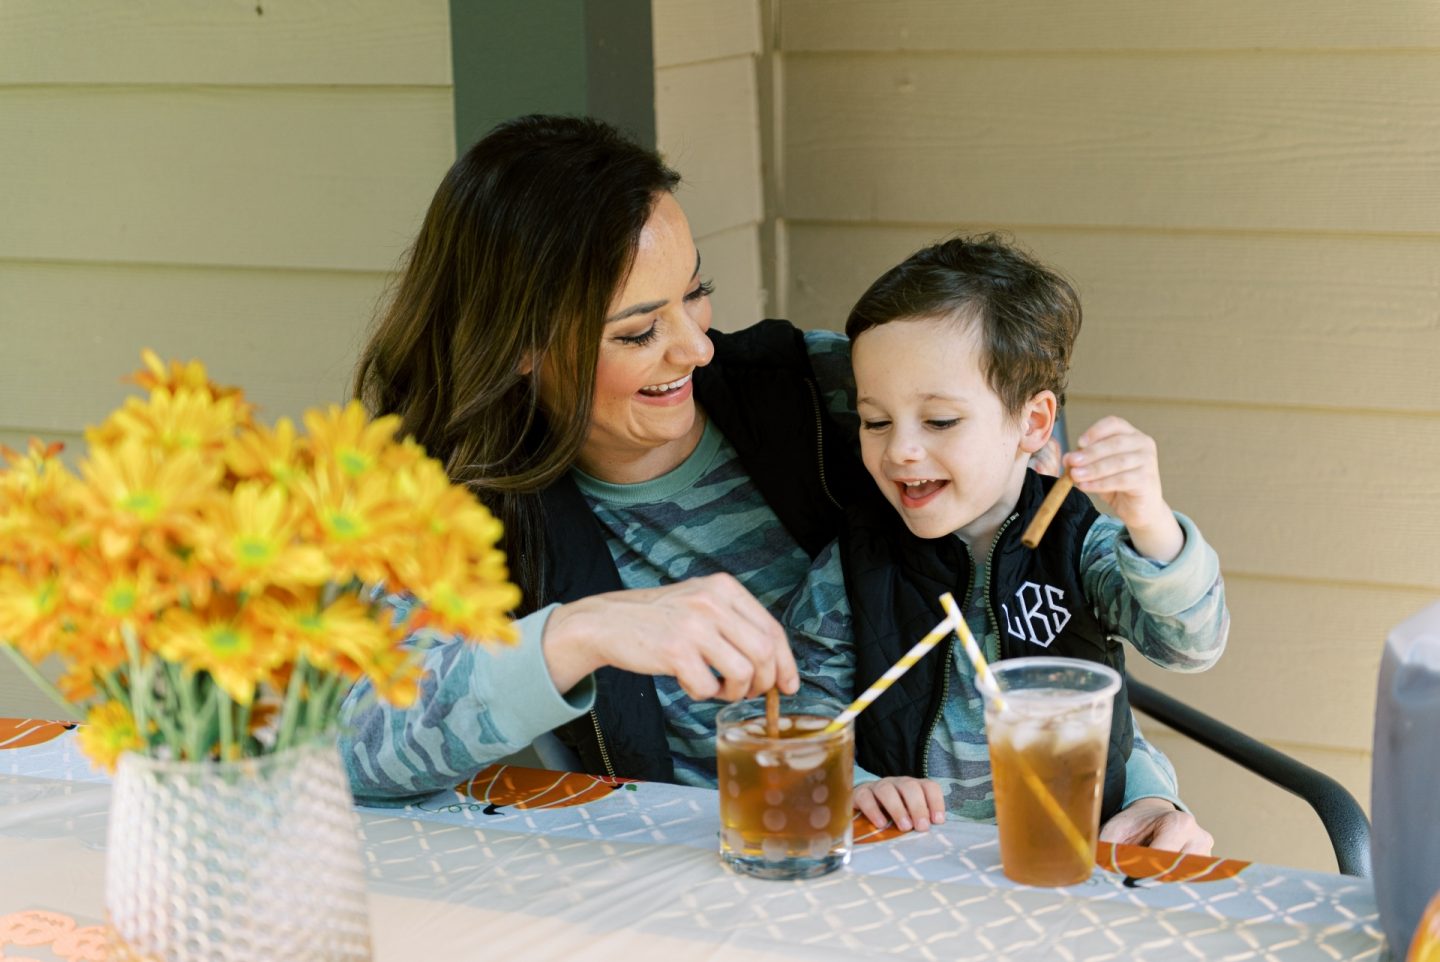 Thanksgiving Turkey Trot Tea Recipe For Kids + Fun Ideas For Families by Life + Style blogger, Heather Brown // My Life Well Loved